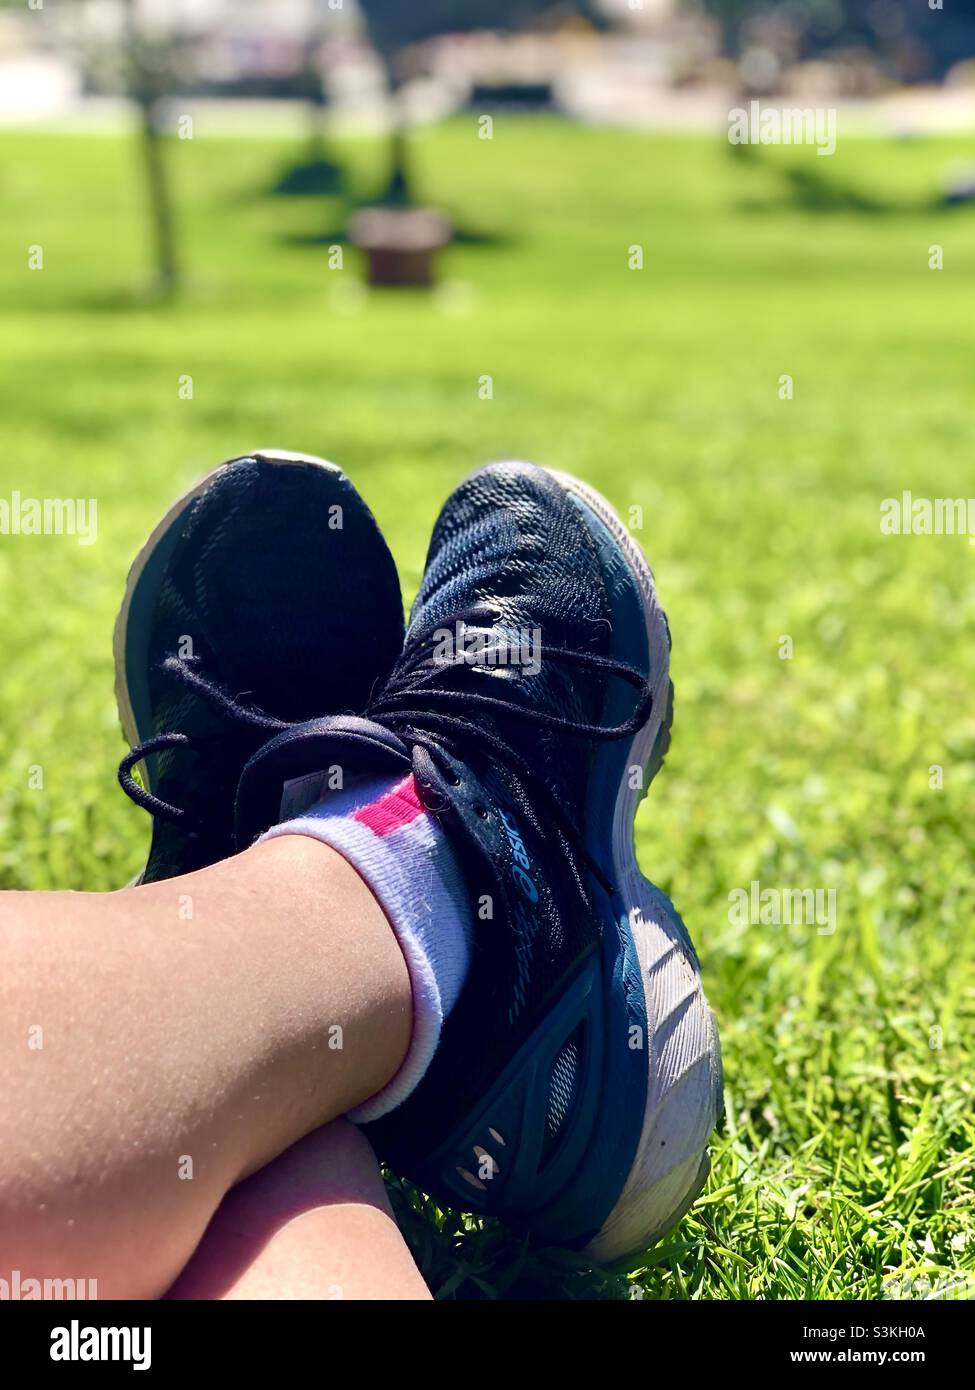 Crossed feet wearing tennis shoes or sneakers in green grass lit by bright sunlight. Stock Photo